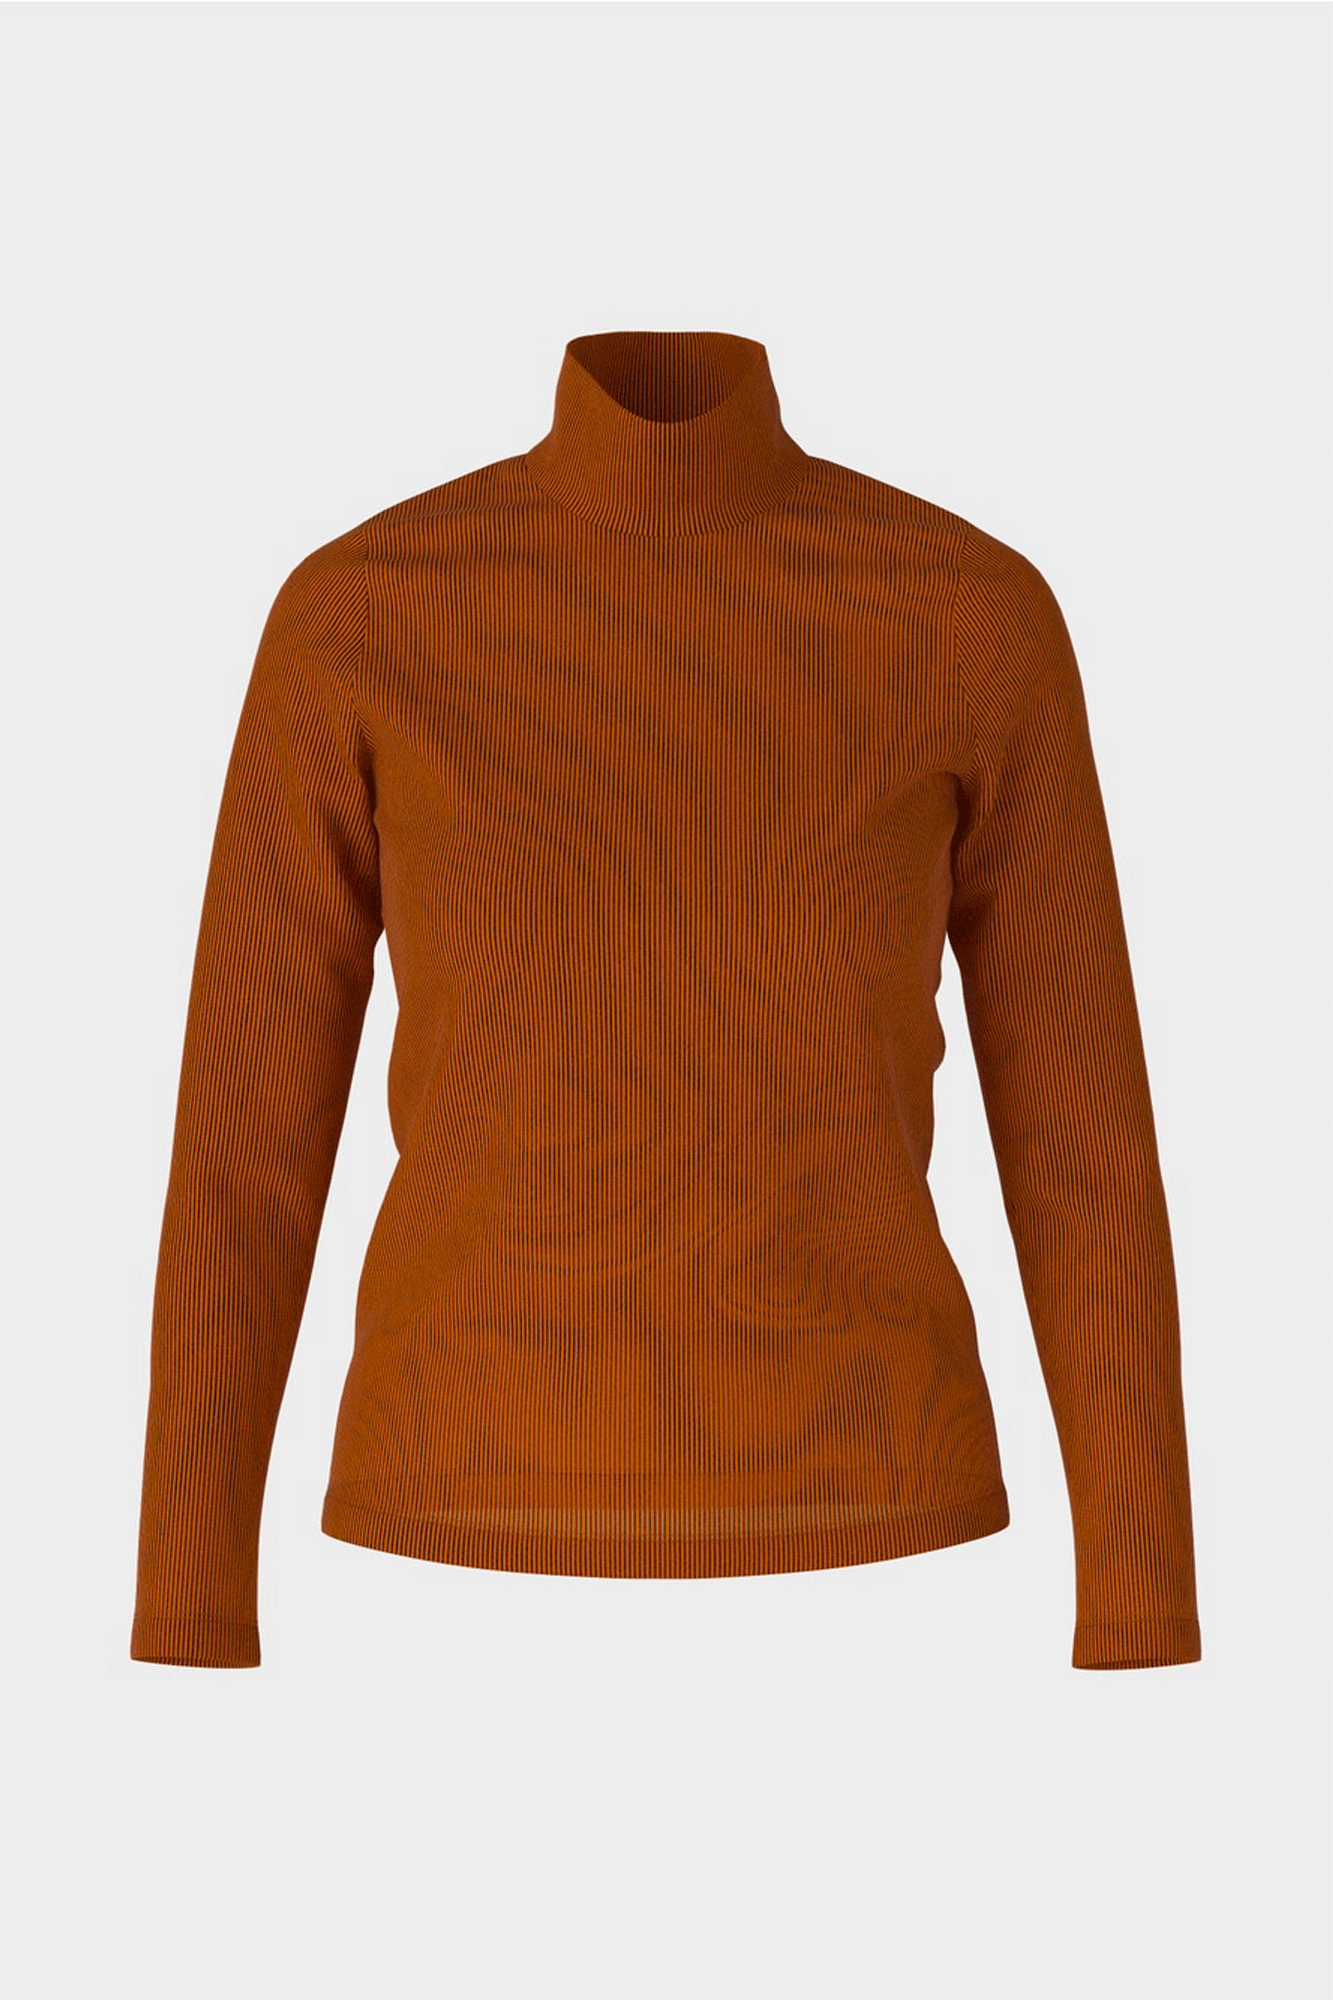 This Ribbed Turtleneck T-Shirt is the perfect wardrobe staple. Crafted from a soft viscose mix, it fits close to the body for a flattering silhouette. Featuring long sleeves and a ribbed design, it's the epitome of modern minimalism, finished with a turtleneck for added style.